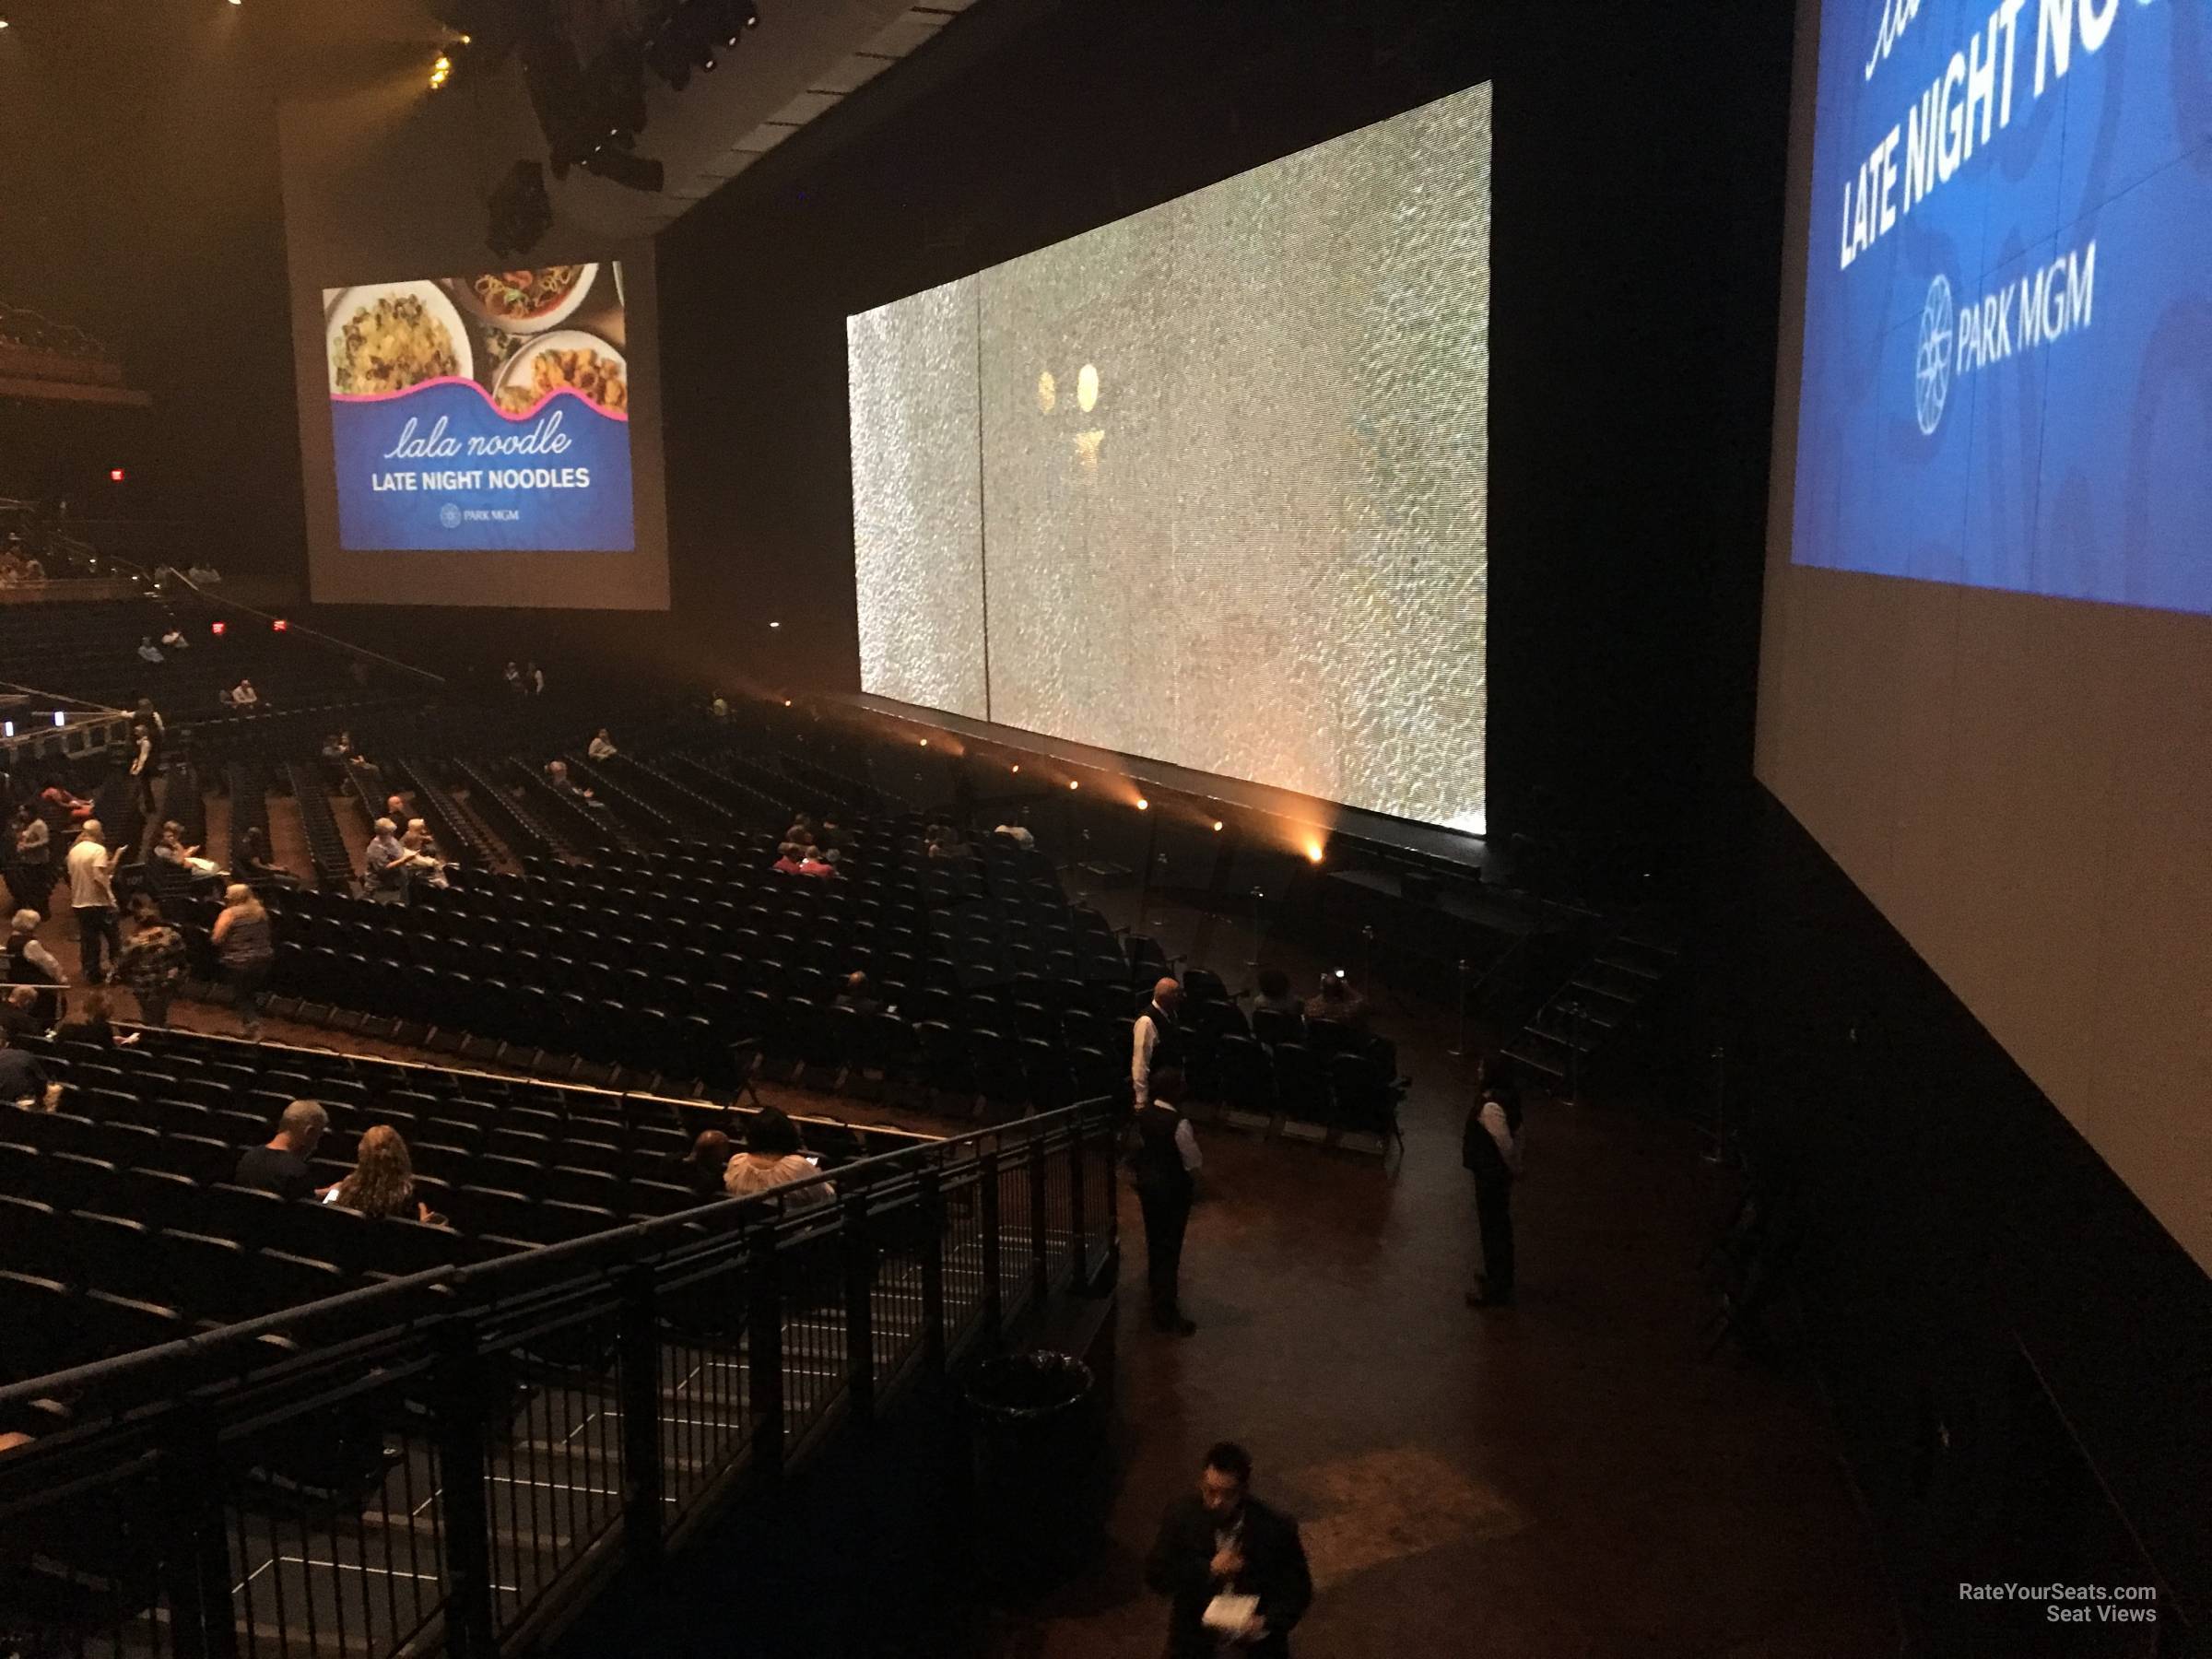 section 301, row c seat view  - dolby live at park mgm